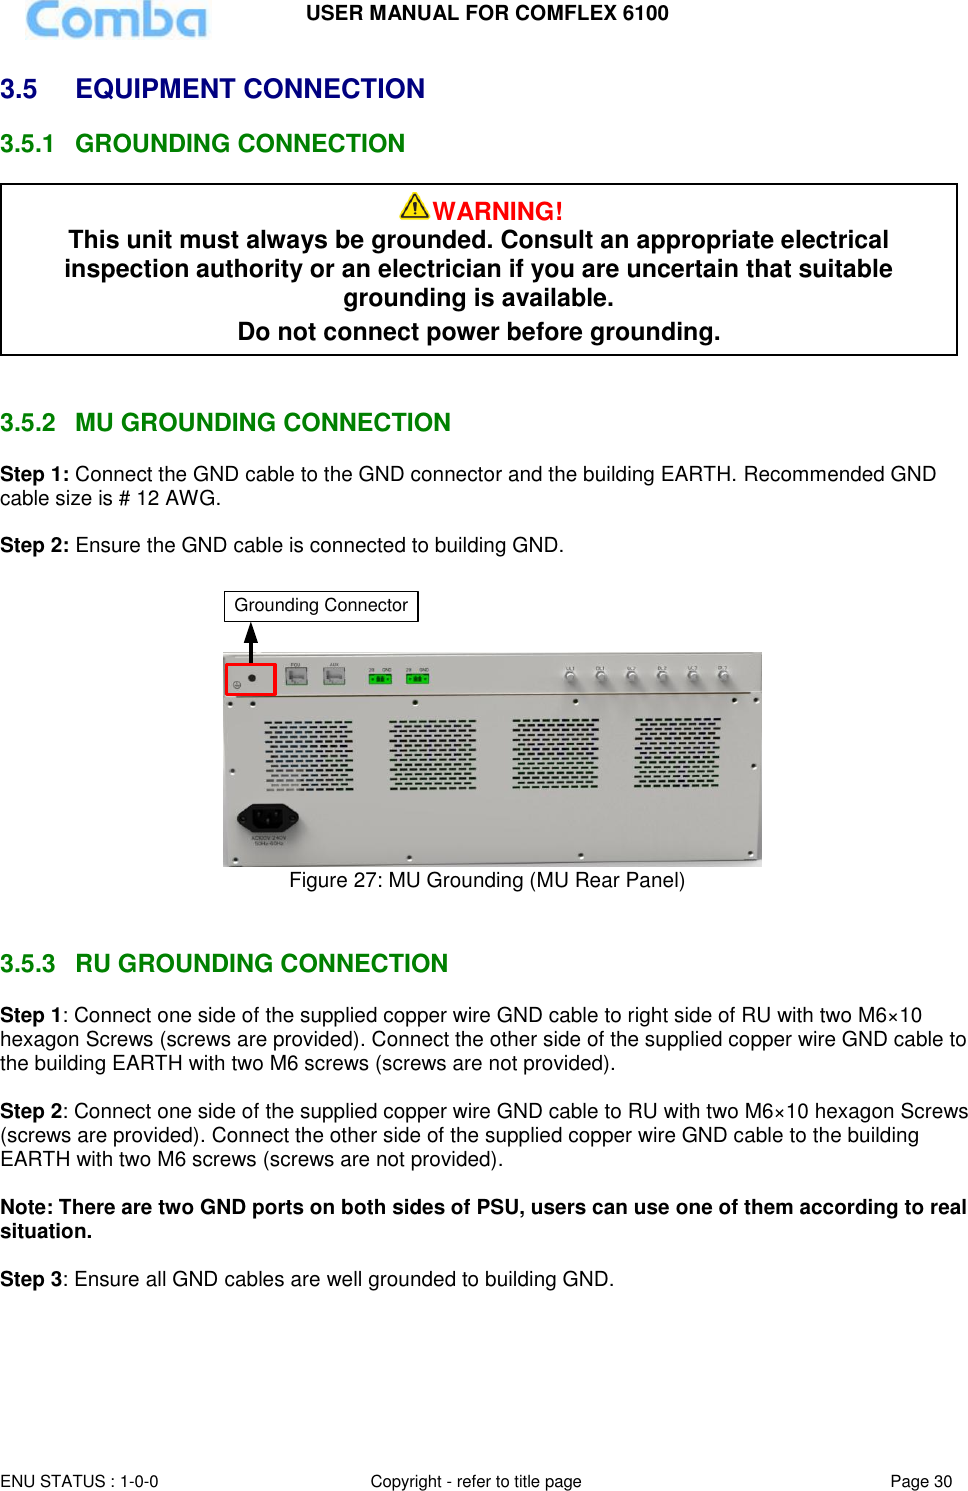 USER MANUAL FOR COMFLEX 6100  ENU STATUS : 1-0-0 Copyright - refer to title page Page 30     3.5  EQUIPMENT CONNECTION  3.5.1  GROUNDING CONNECTION    3.5.2  MU GROUNDING CONNECTION Step 1: Connect the GND cable to the GND connector and the building EARTH. Recommended GND cable size is # 12 AWG.  Step 2: Ensure the GND cable is connected to building GND.  Grounding Connector Figure 27: MU Grounding (MU Rear Panel)   3.5.3  RU GROUNDING CONNECTION Step 1: Connect one side of the supplied copper wire GND cable to right side of RU with two M6×10 hexagon Screws (screws are provided). Connect the other side of the supplied copper wire GND cable to the building EARTH with two M6 screws (screws are not provided).  Step 2: Connect one side of the supplied copper wire GND cable to RU with two M6×10 hexagon Screws (screws are provided). Connect the other side of the supplied copper wire GND cable to the building EARTH with two M6 screws (screws are not provided).  Note: There are two GND ports on both sides of PSU, users can use one of them according to real situation.  Step 3: Ensure all GND cables are well grounded to building GND.  WARNING! This unit must always be grounded. Consult an appropriate electrical inspection authority or an electrician if you are uncertain that suitable grounding is available.   Do not connect power before grounding. 